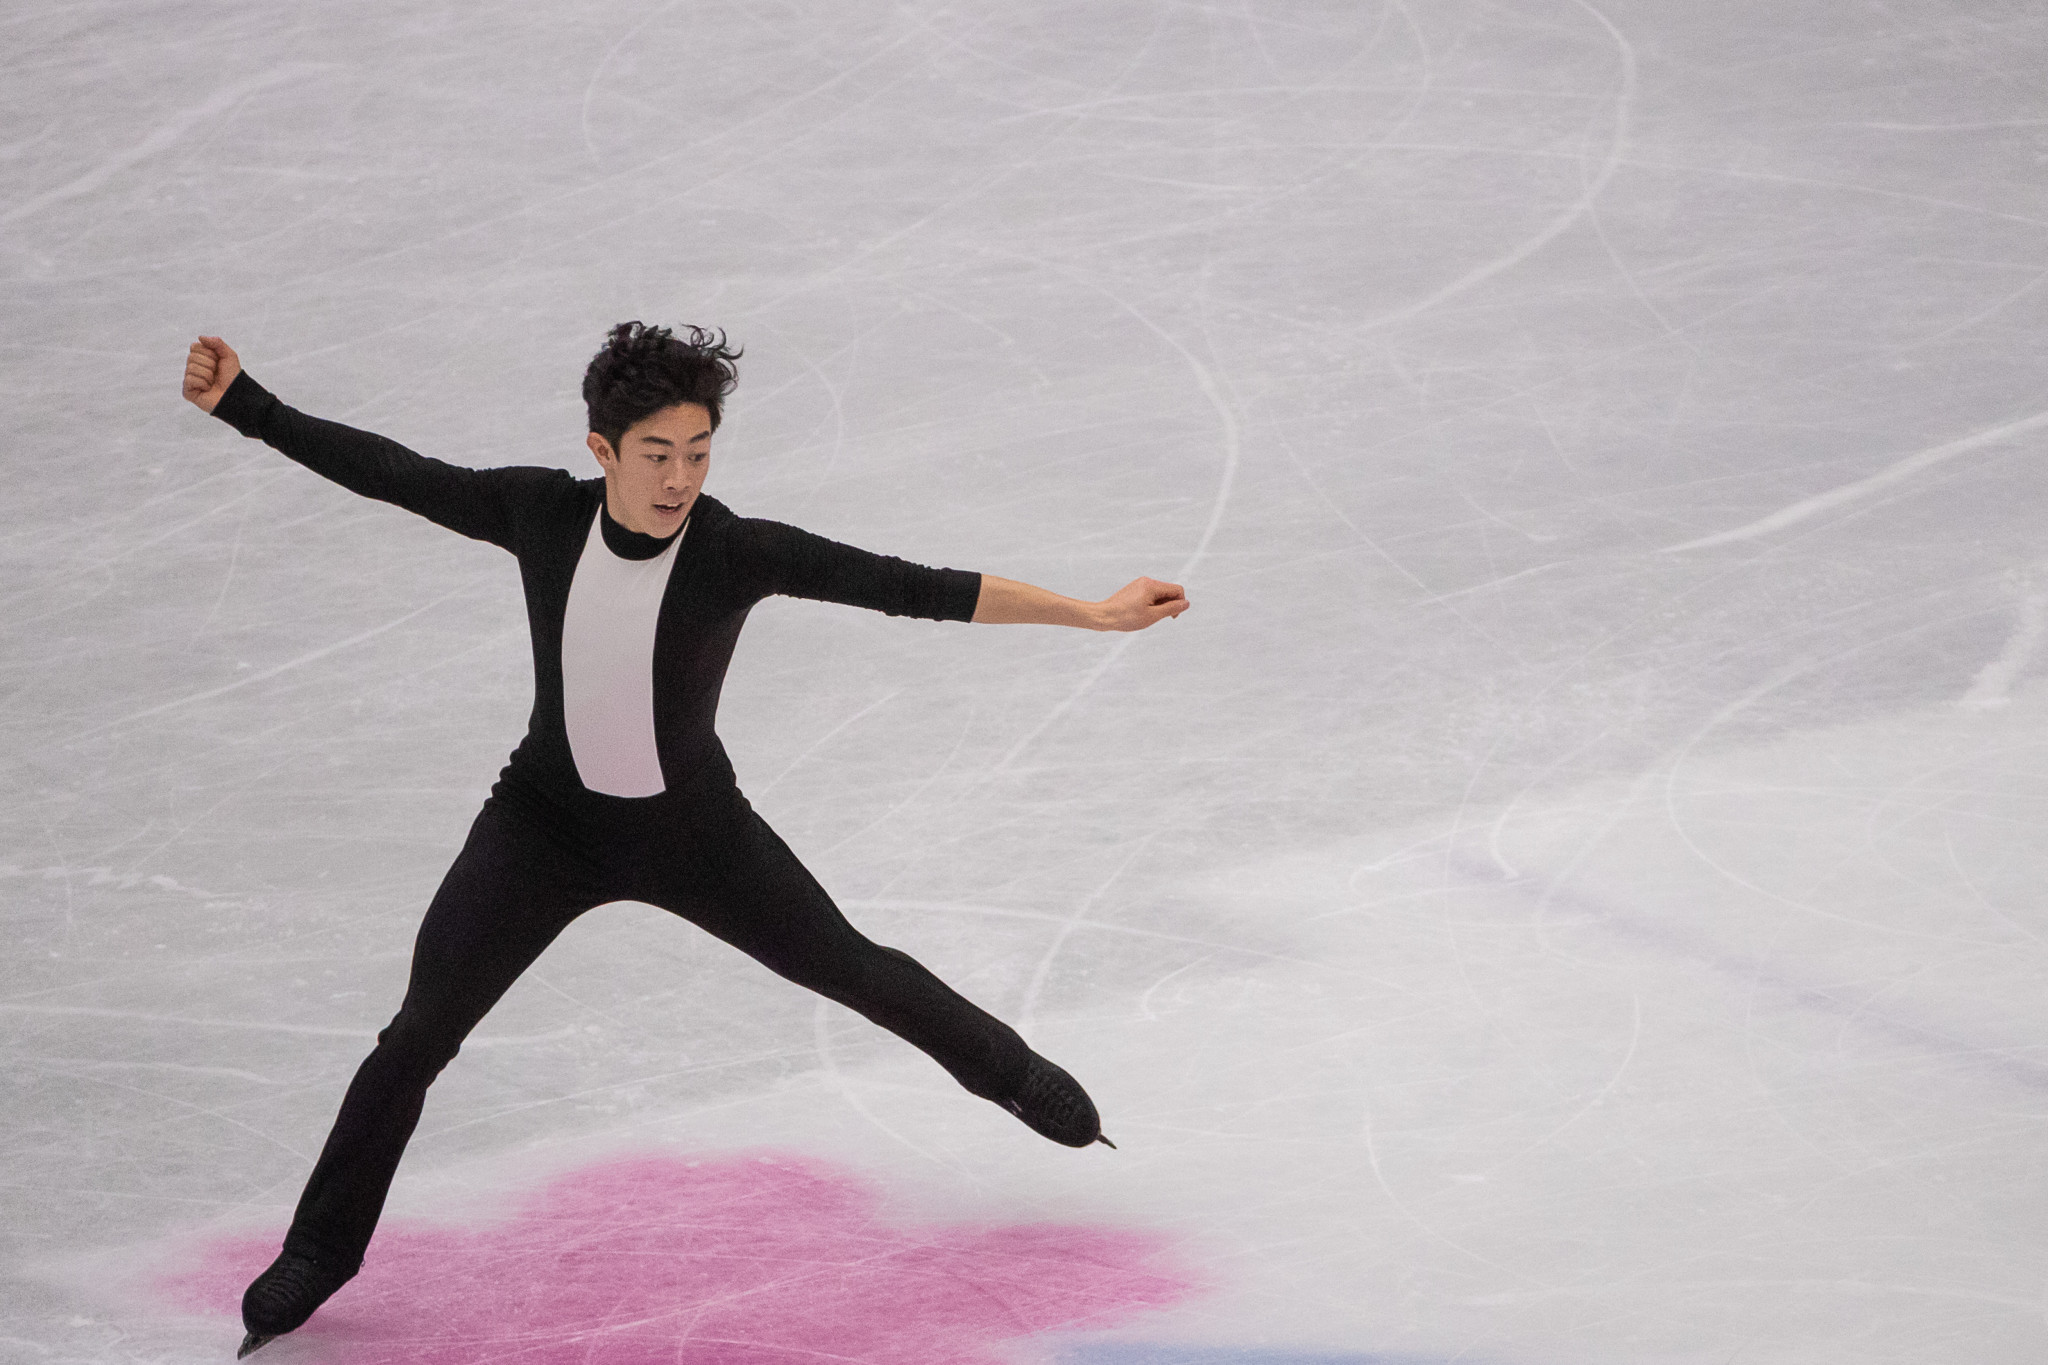 Nathan Chen dominated the men's short programme ©Getty Images